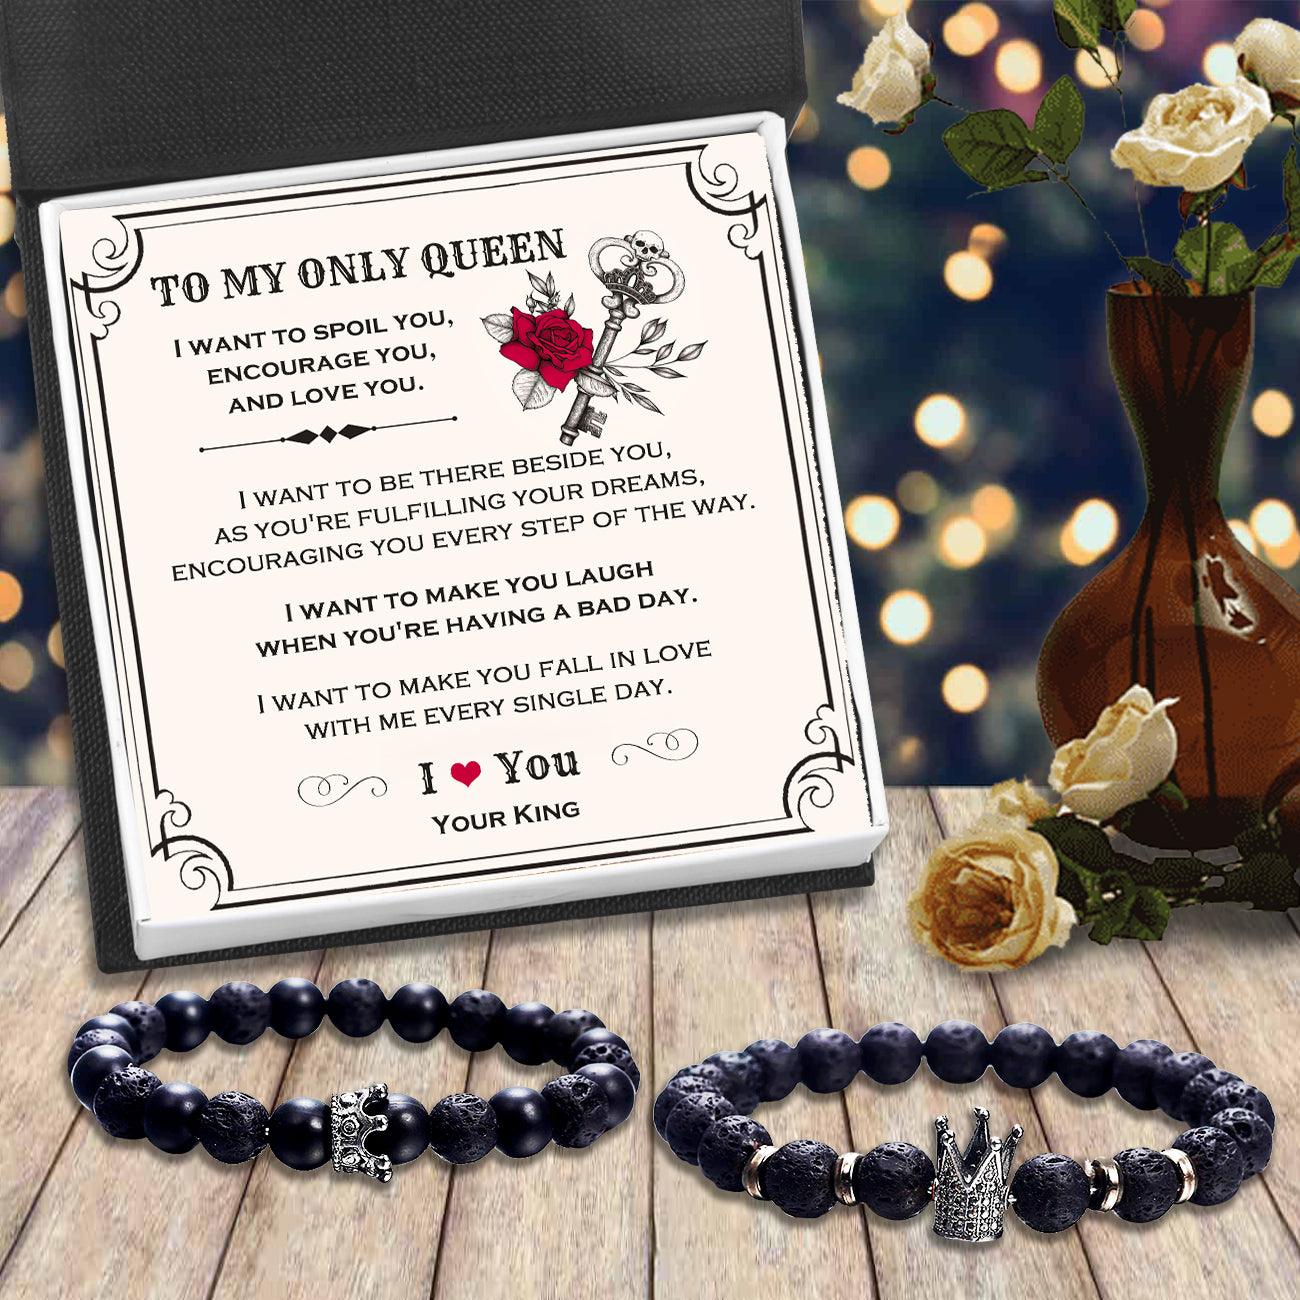 King & Queen Couple Bracelets - Skull - To My Only Queen - I Want To Make You Fall In Love With Me Every Single Day - Augbae13009 - Gifts Holder